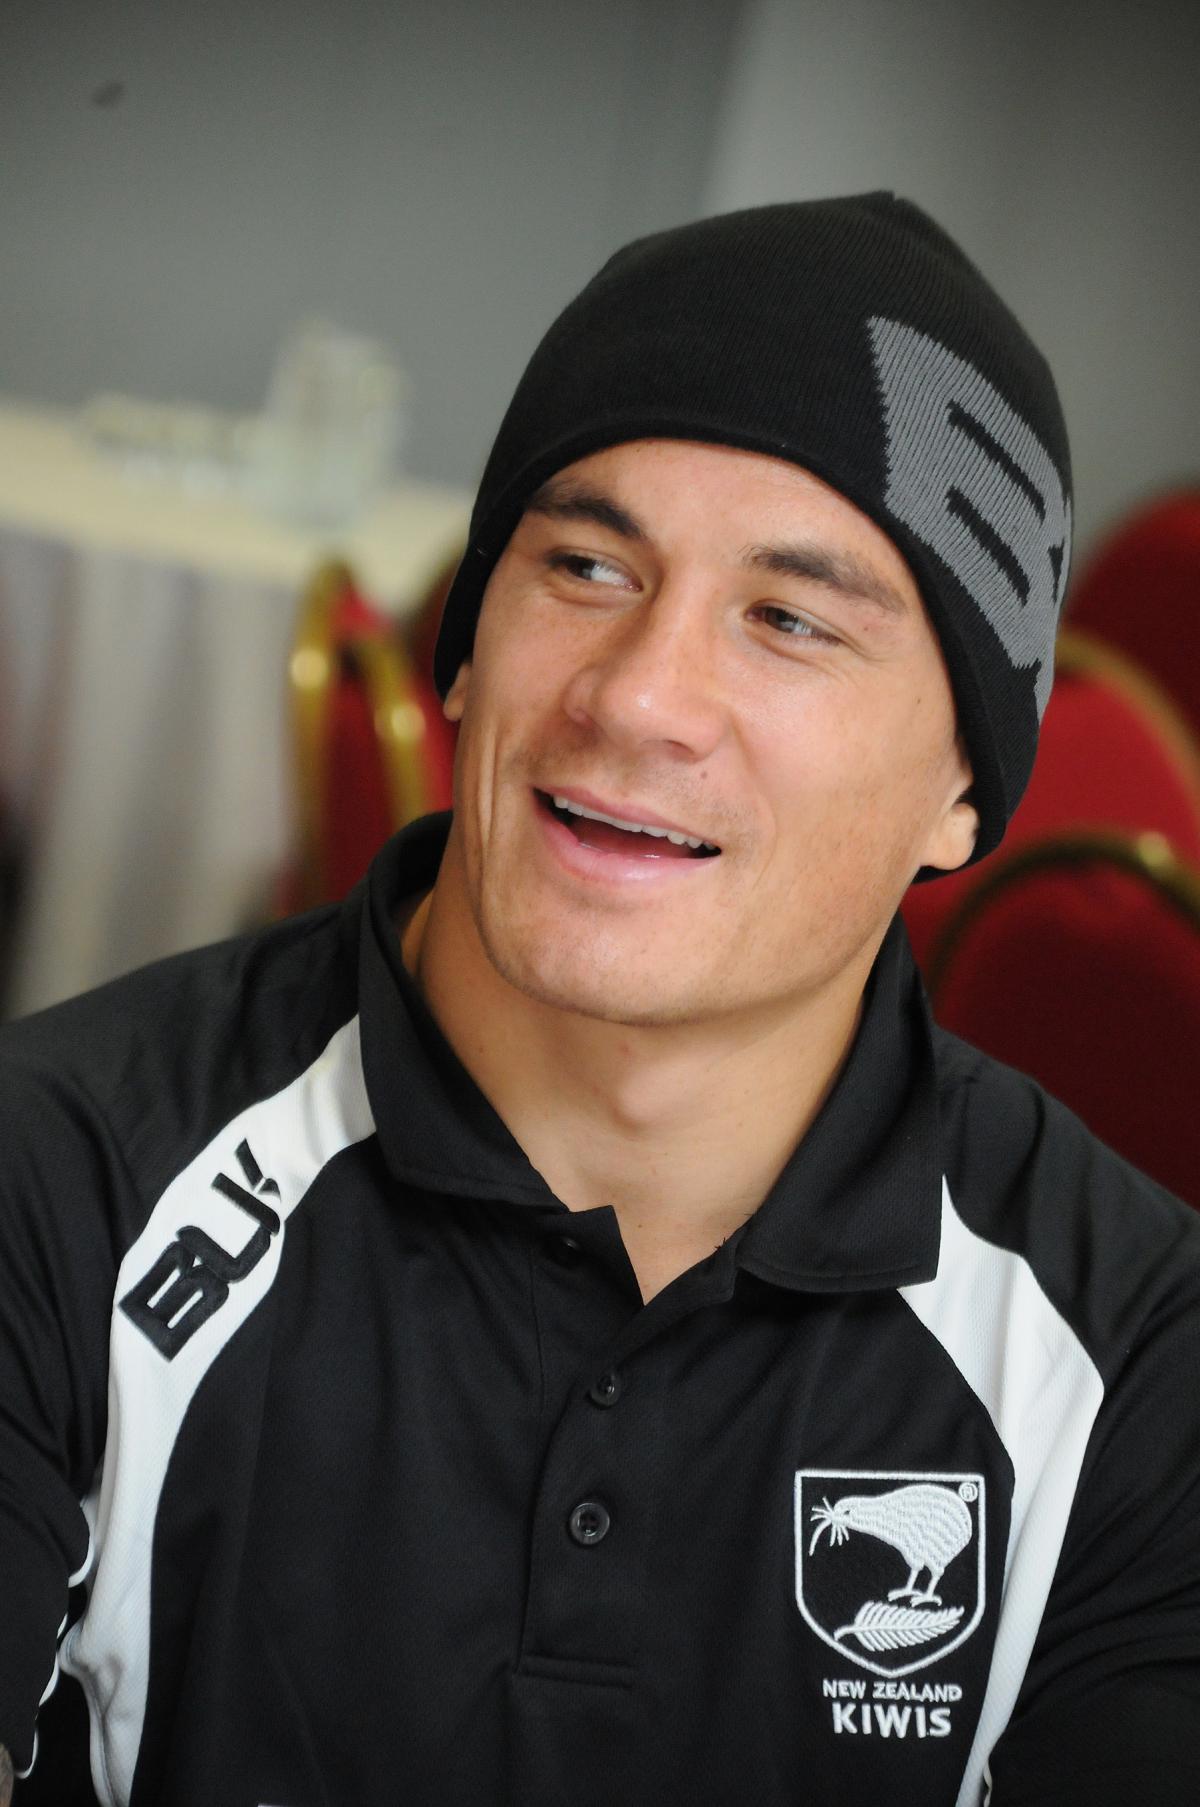 New Zealand players Q&A session with junior rugby league players at Langtree Park, St Helens - Sonny Bill Williams